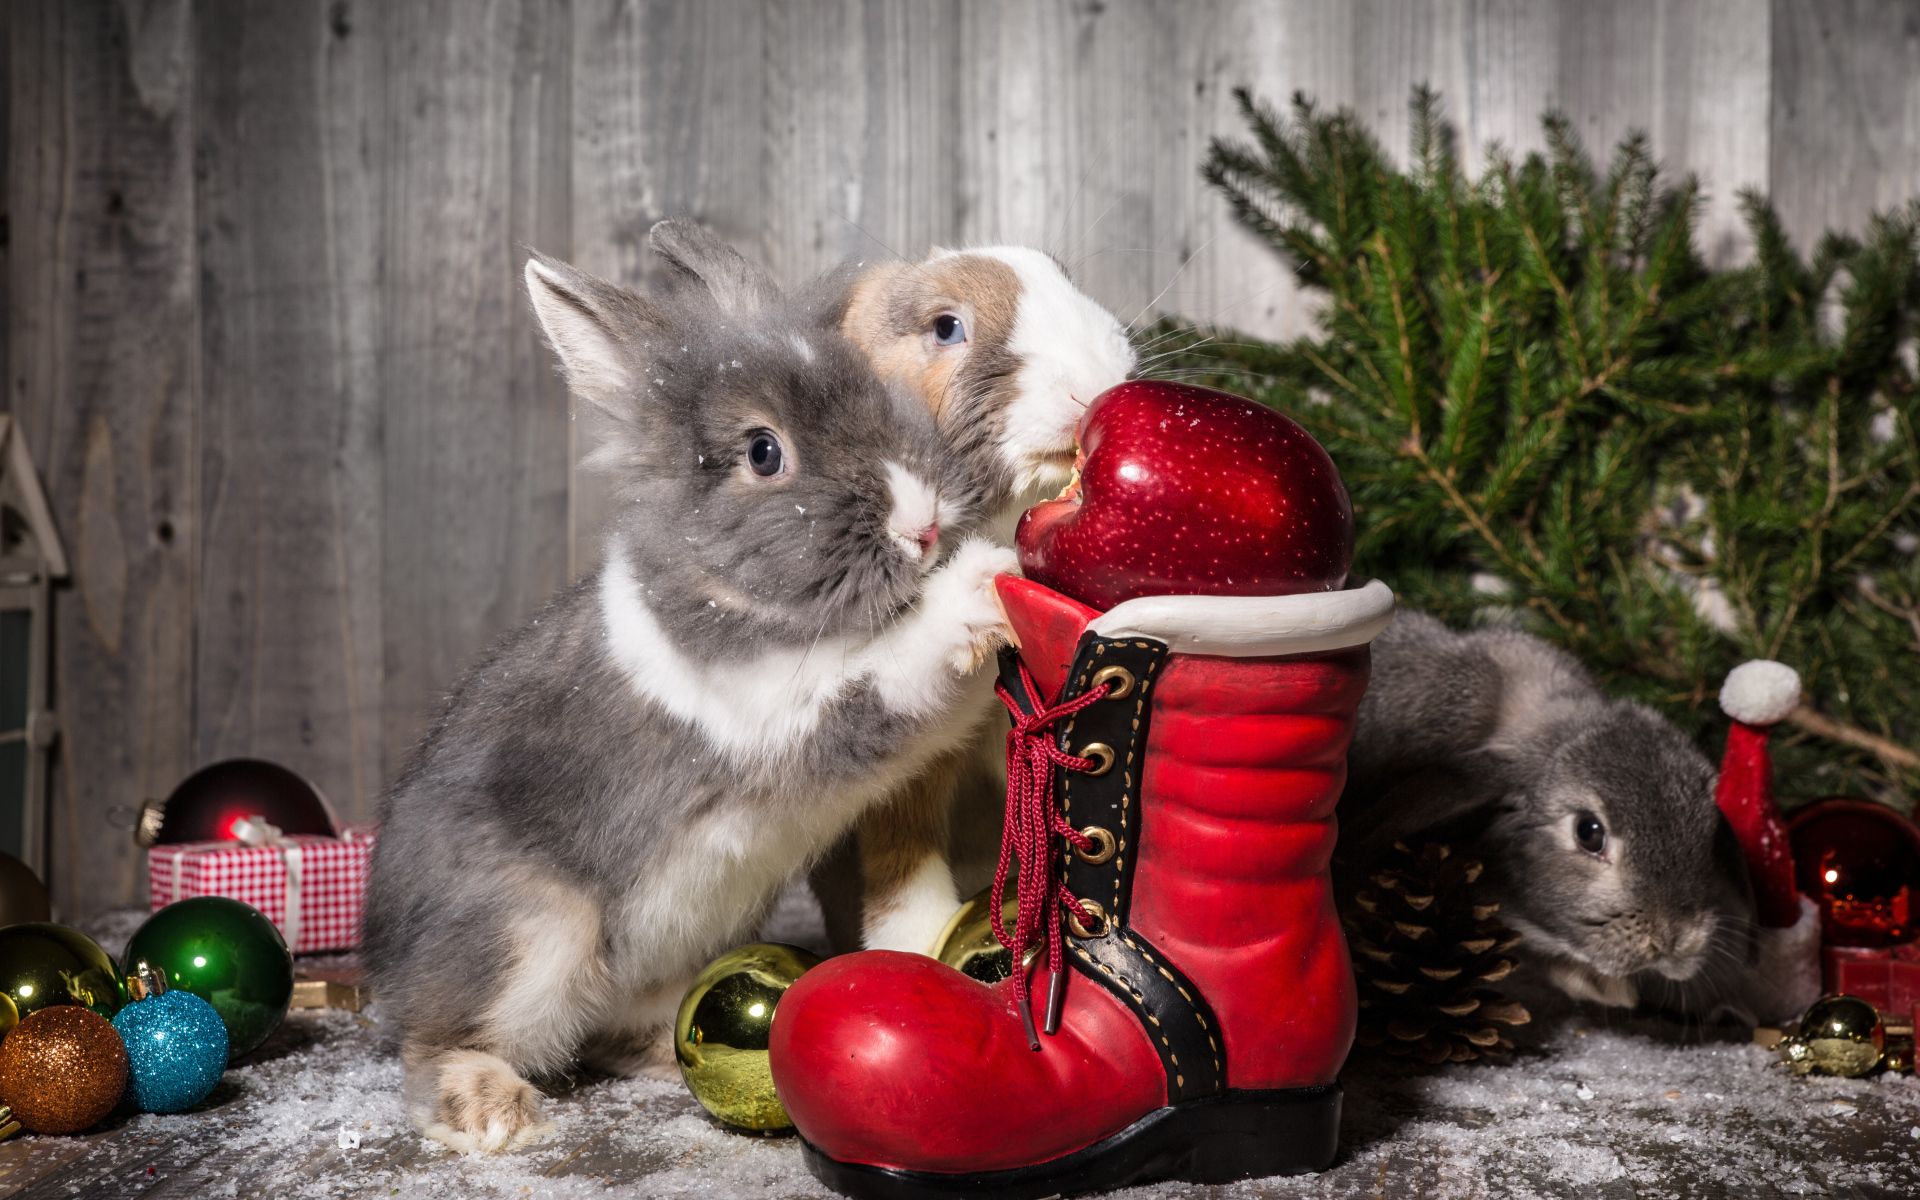 Two rabbits with a Christmas boot and spruce